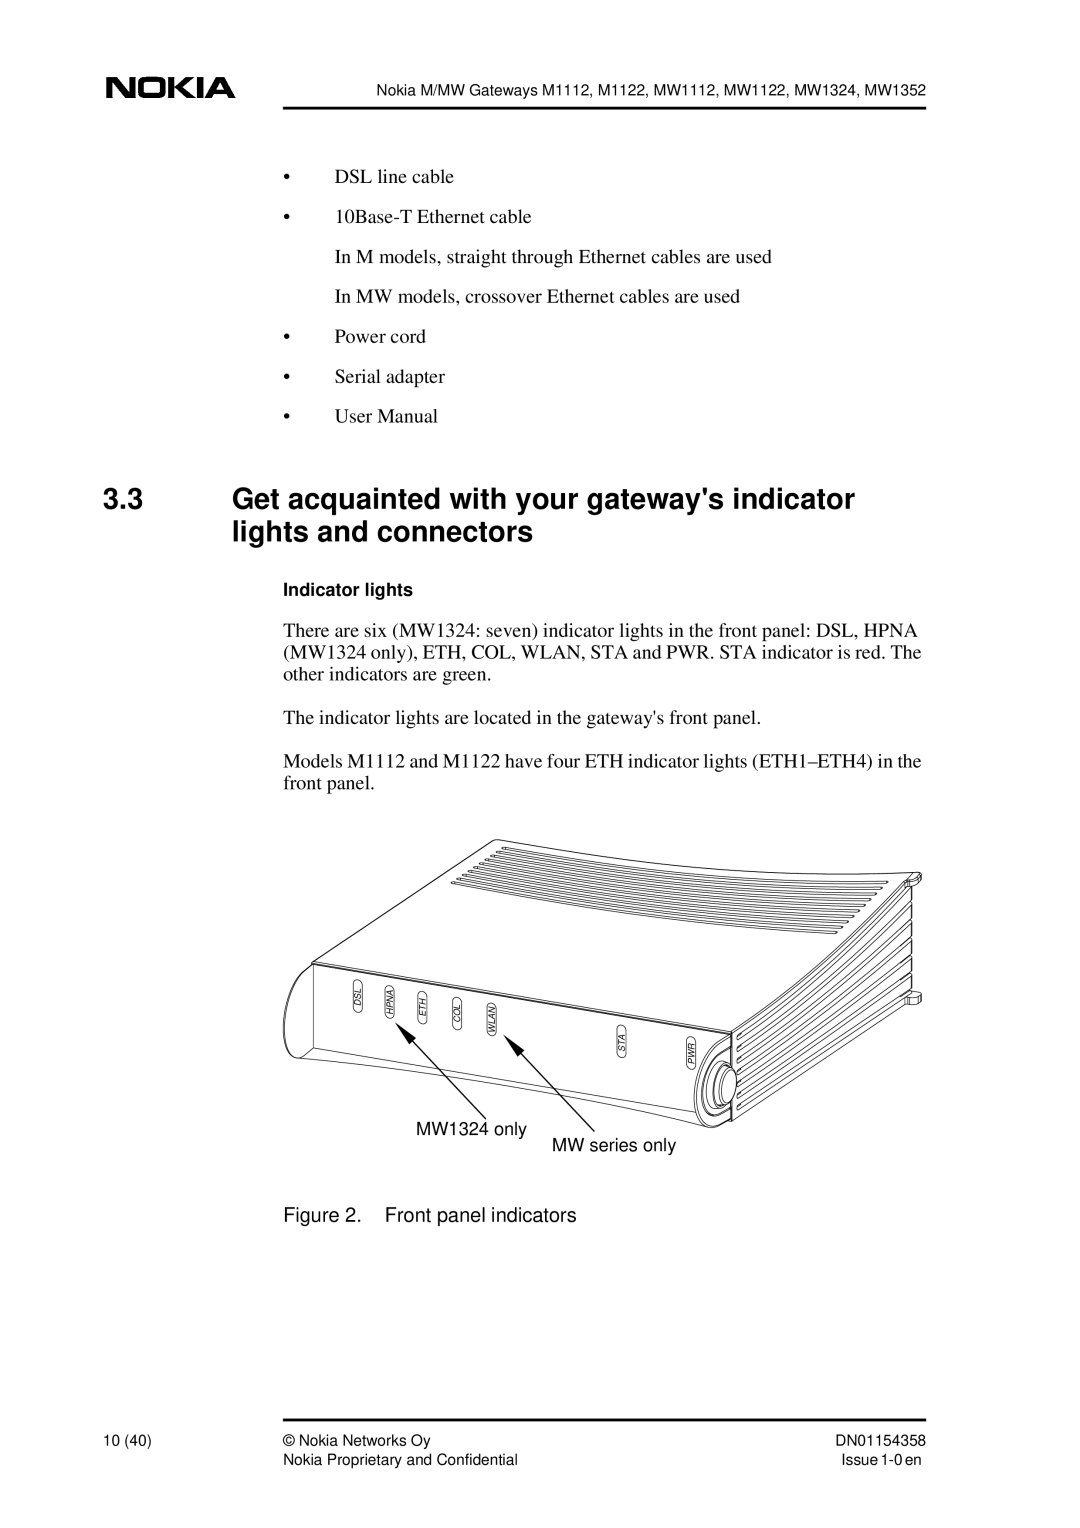 Nokia DSL Gateway High-Speed Internet Connection manual Get acquainted with your gateways indicator lights and connectors 